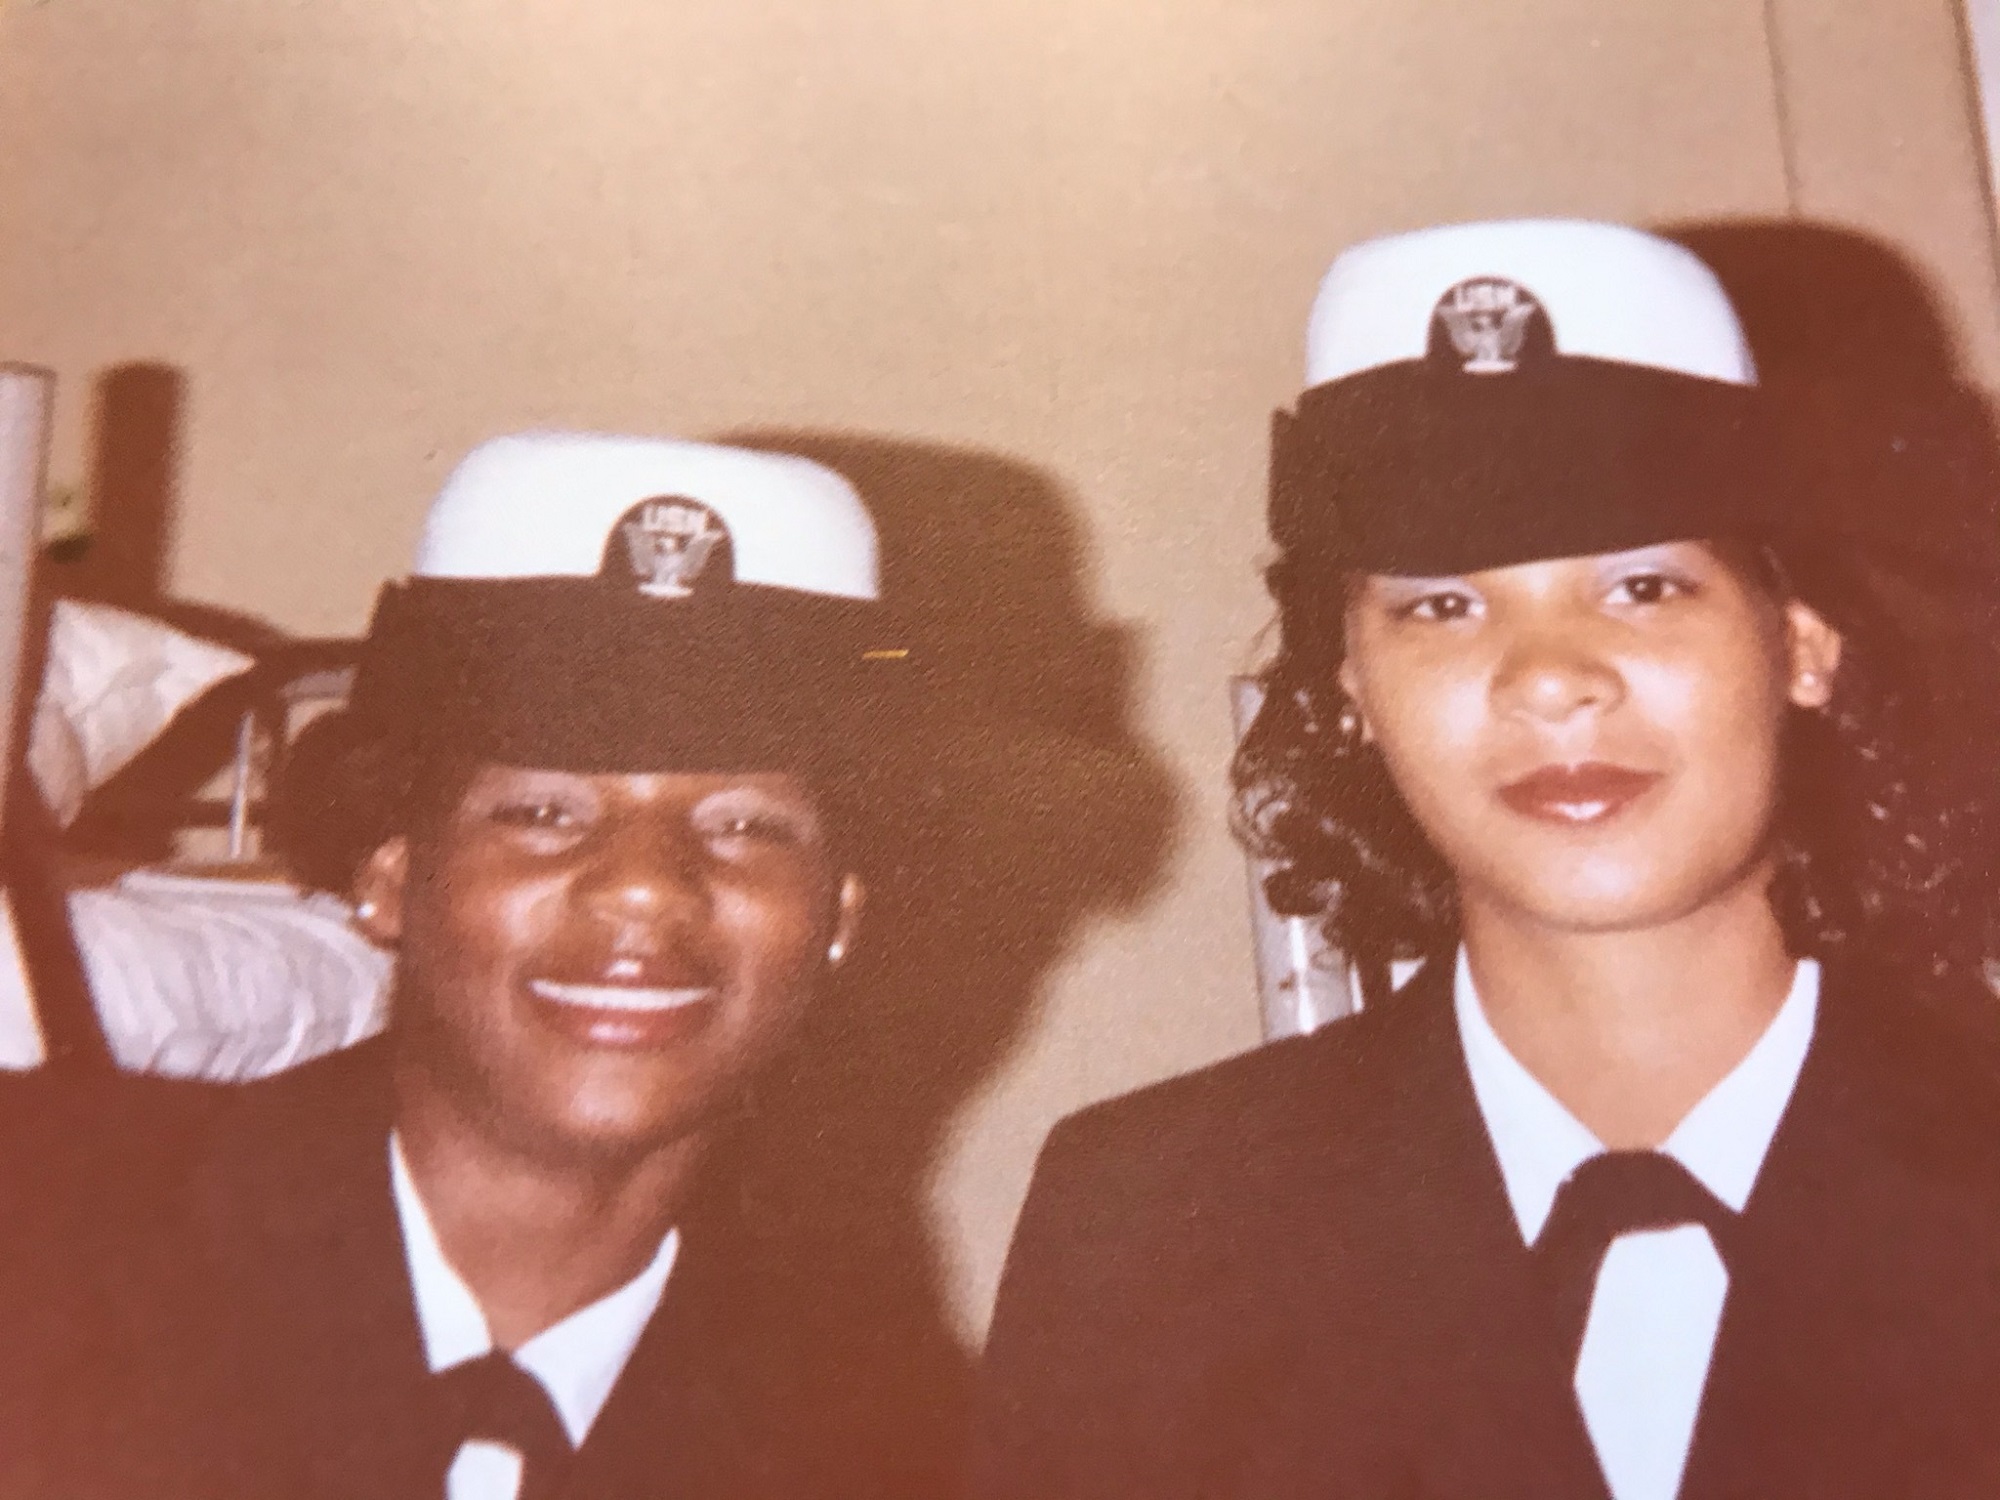 Legal Chief Lorrie McNeal Saylor and Floretta Lewis, aka Aunt Flo, in boot camp. (Courtesy of Lorrie McNeal Saylor)